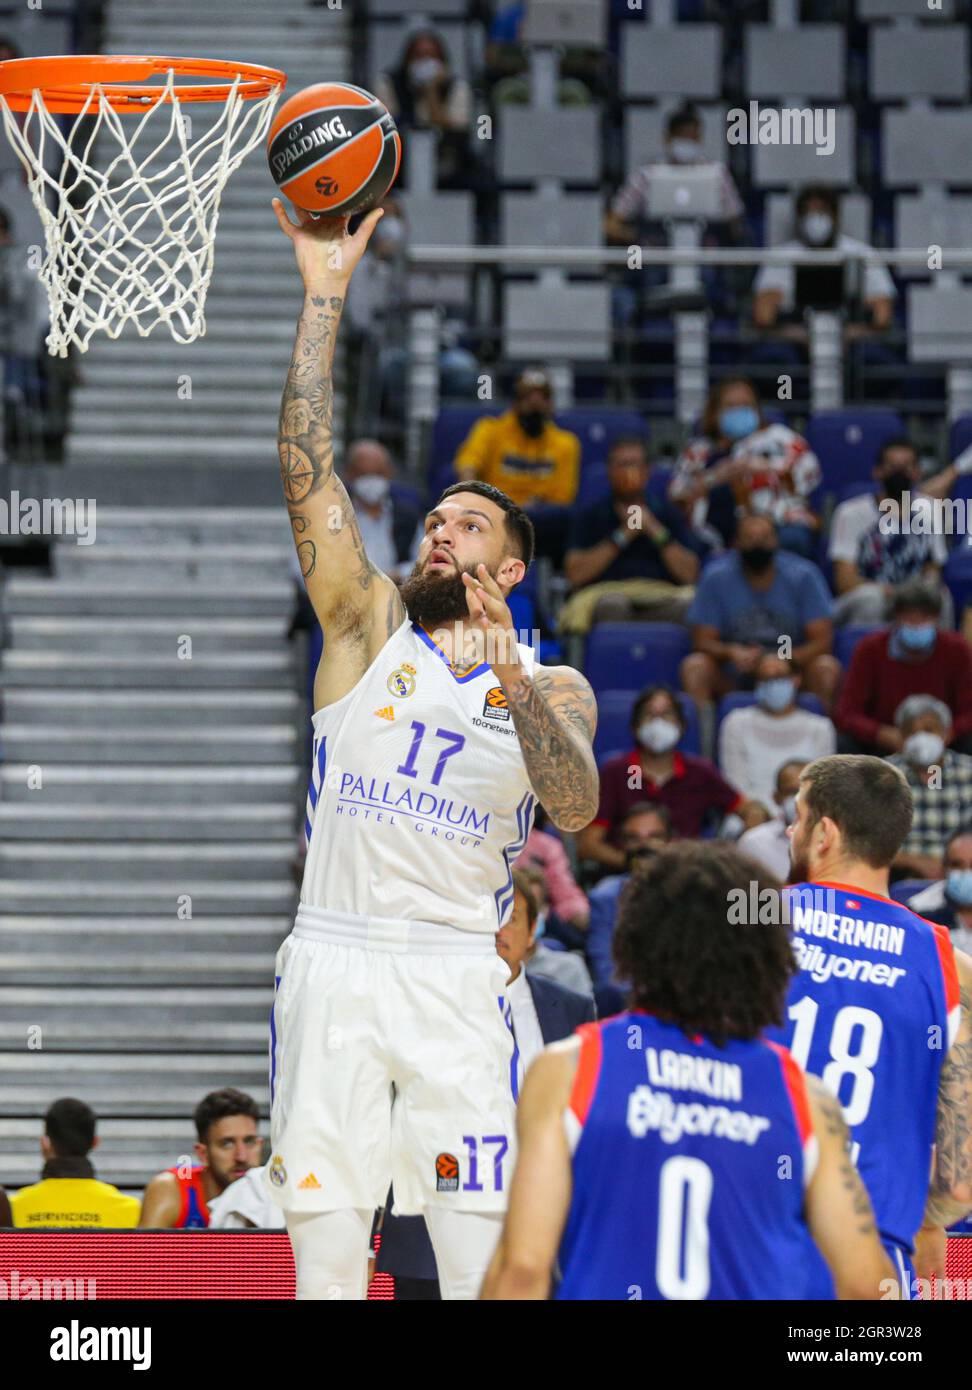 Madrid, Spain. 30th 2021; Madrid, Spain: Euroleague Basketball, Real Madrid versus Anadolu Efes Istanbul; Vincent Poirier of team Real Madrid scores for 2 points during the Matchday 1 between Real Madrid